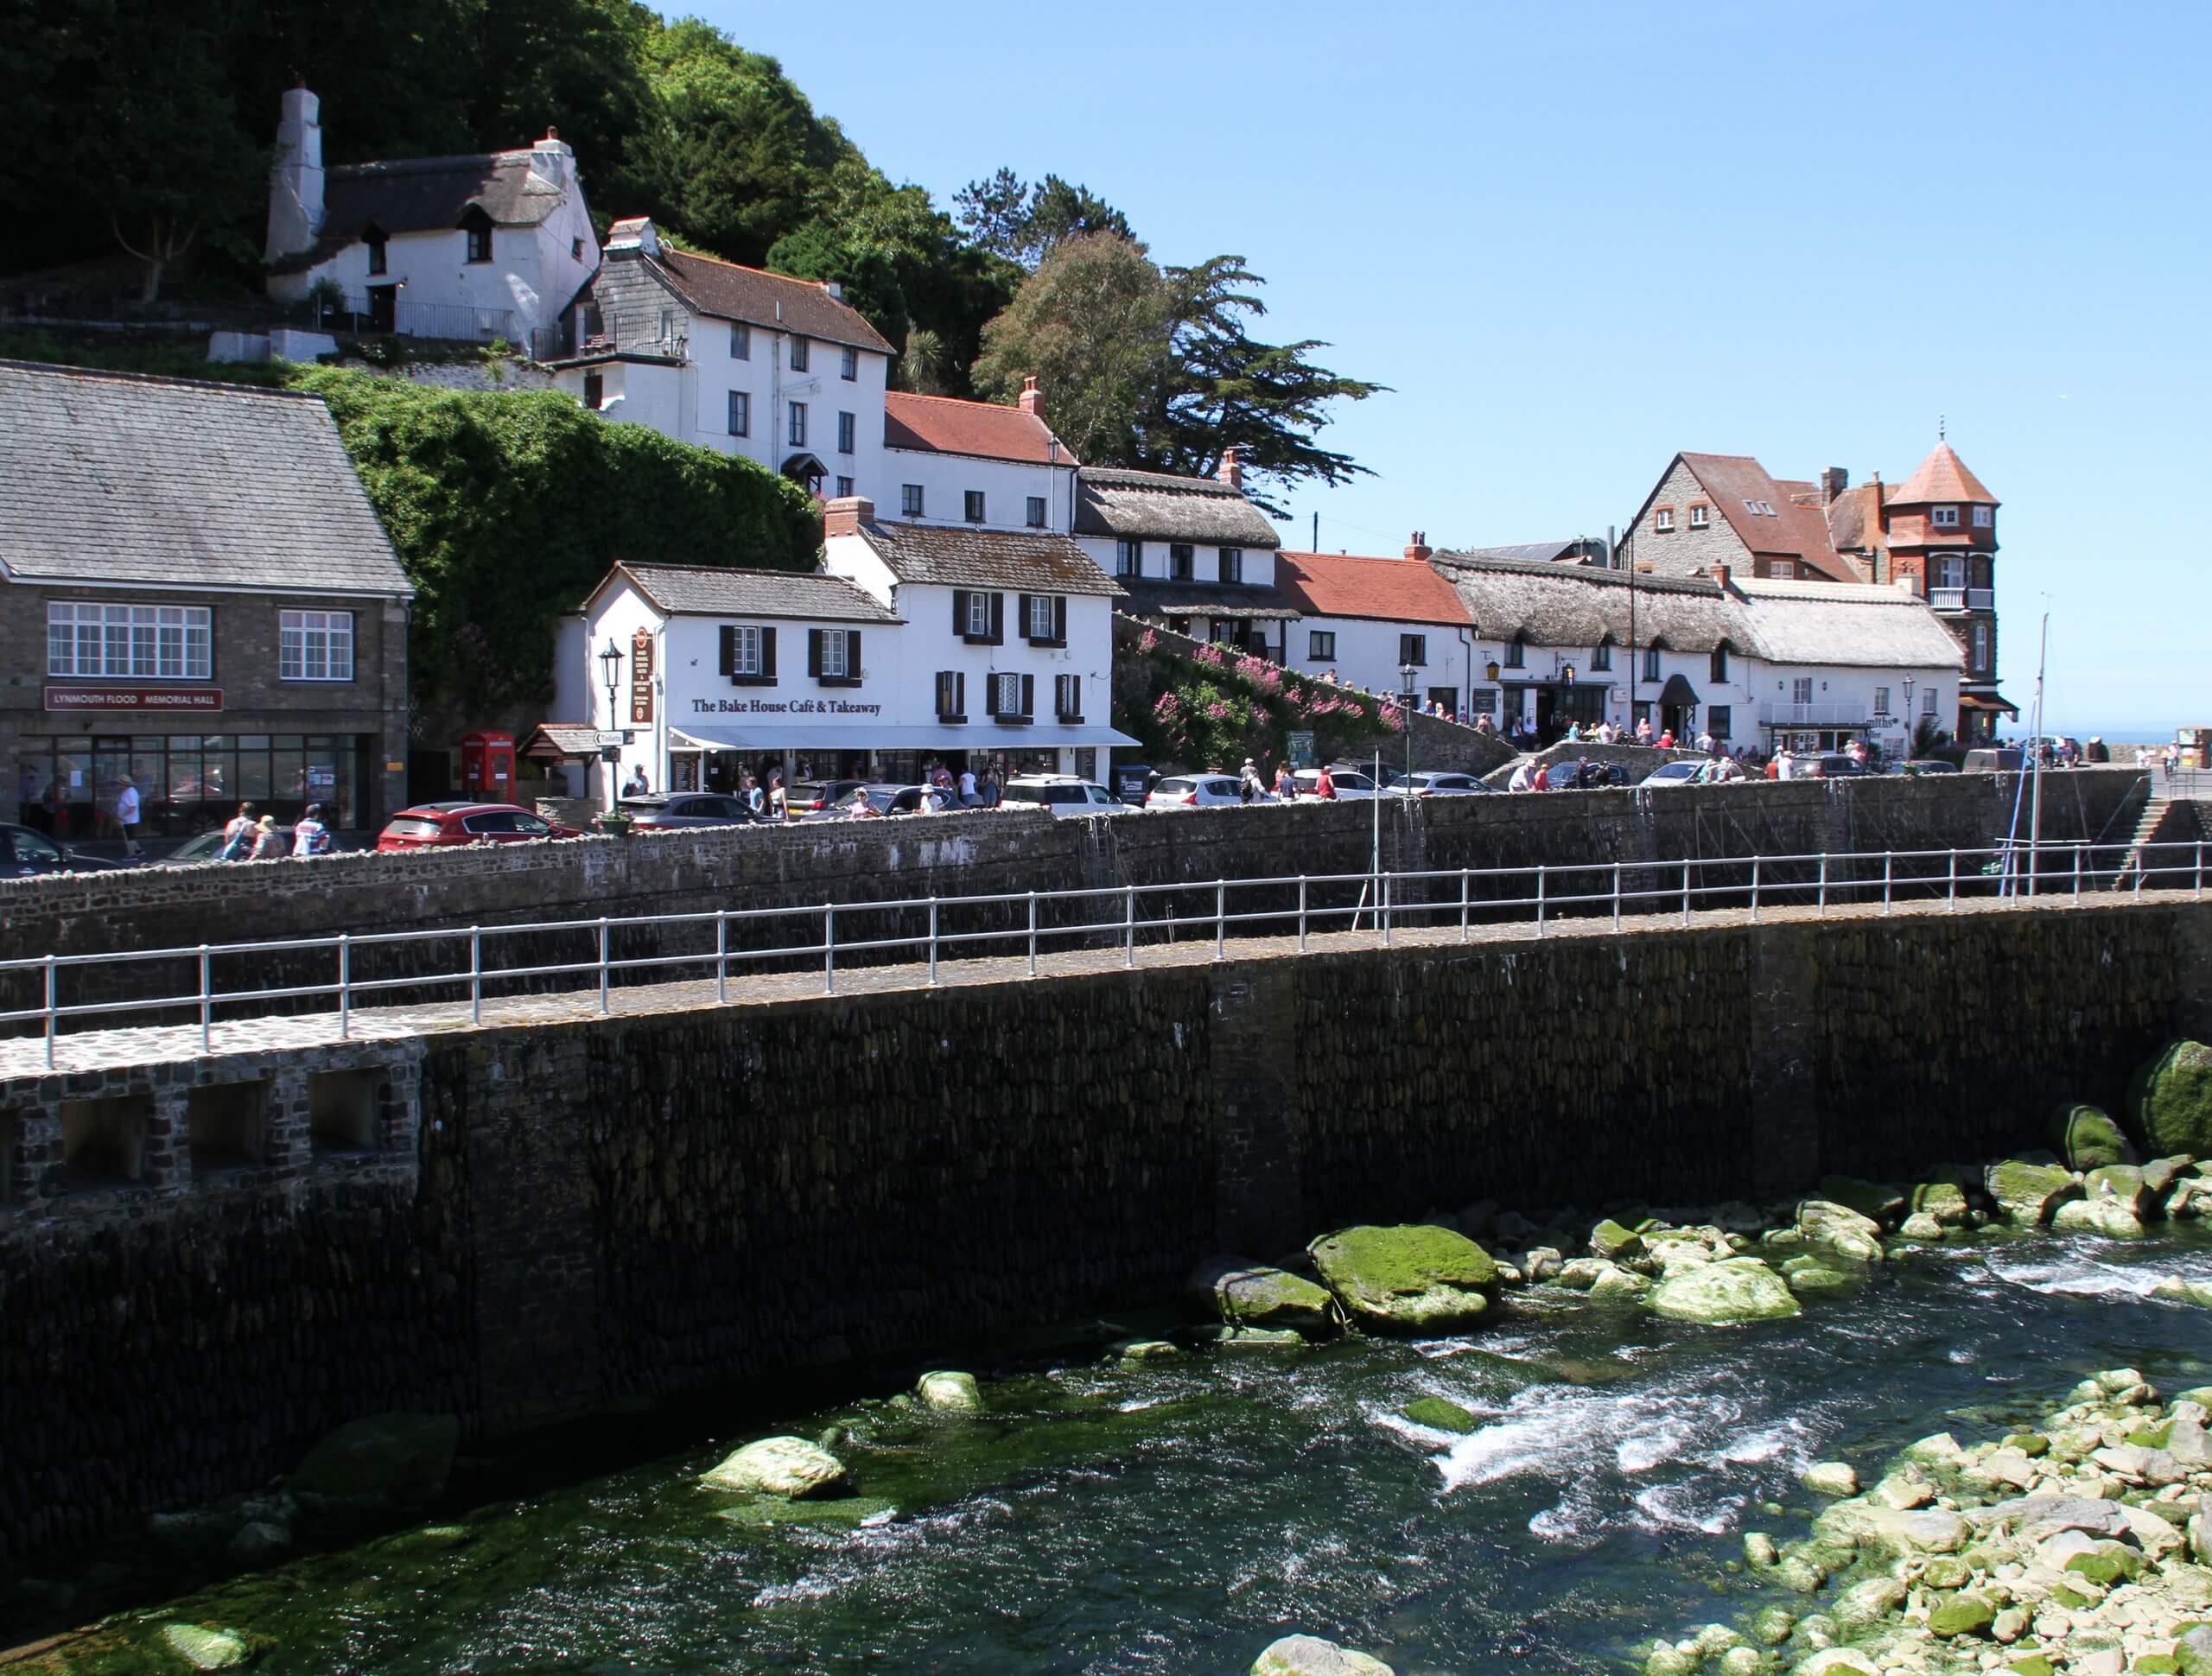 Lynmouth to Brendon Walk